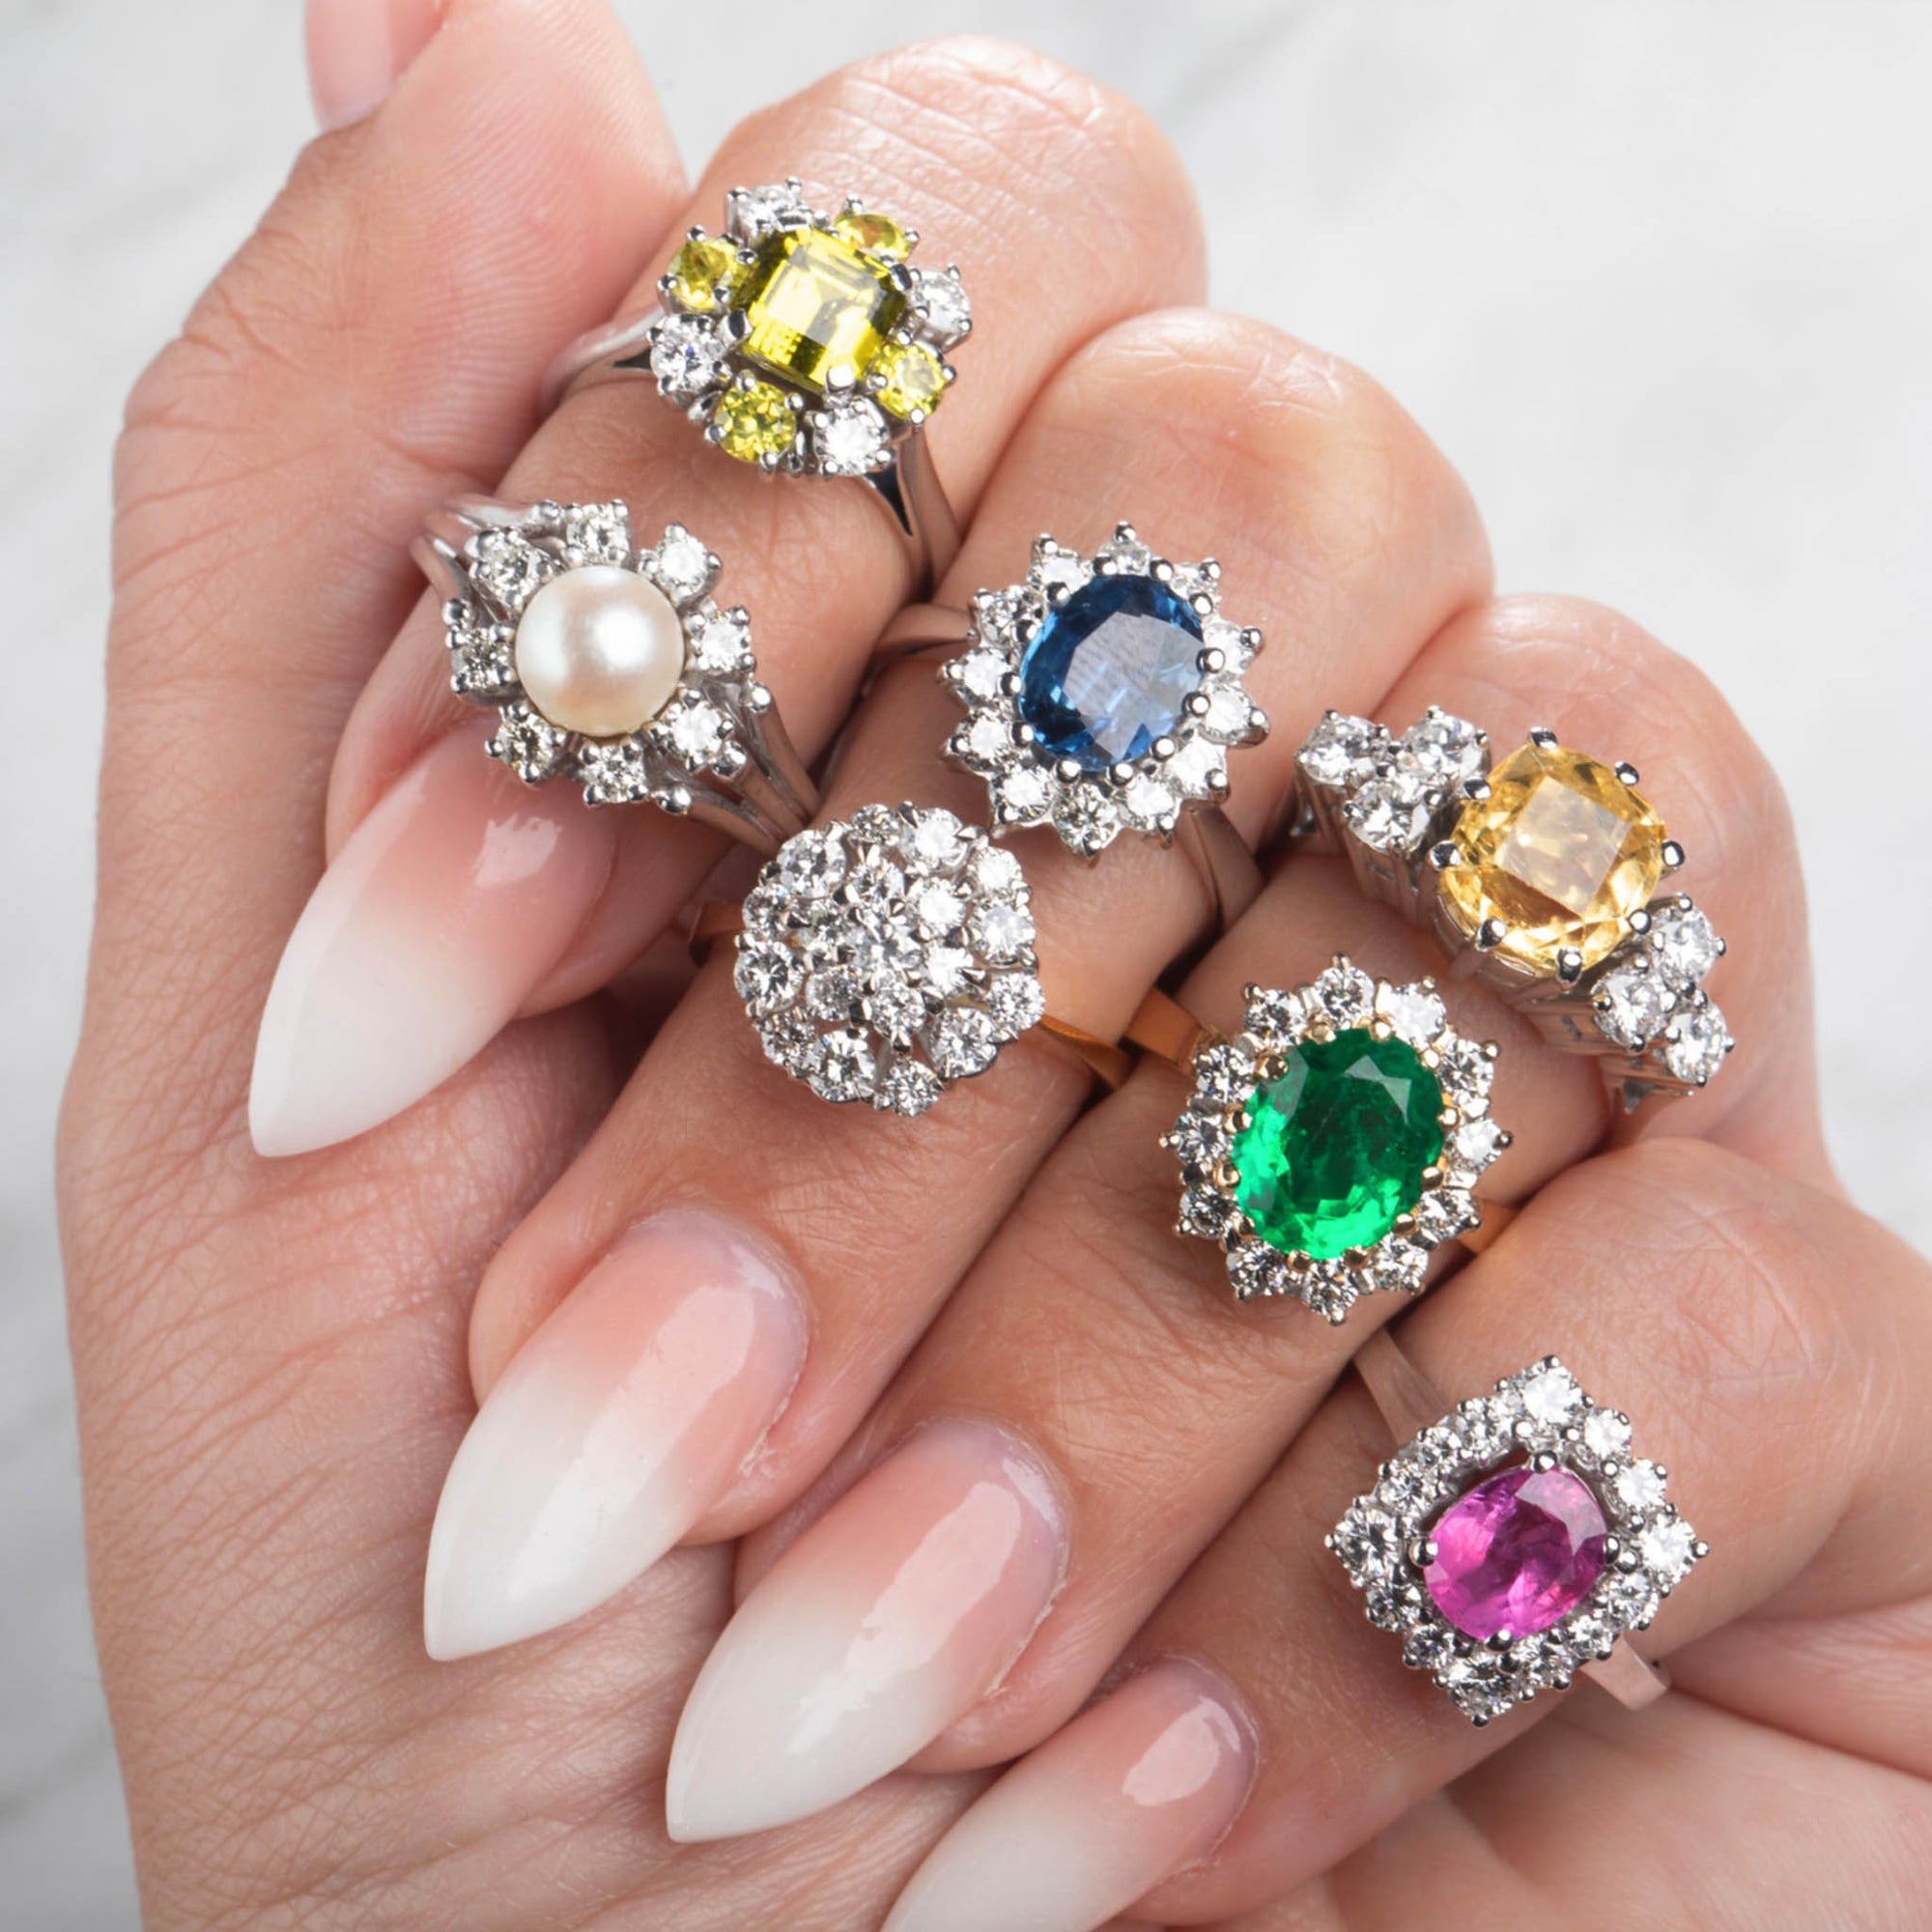 Why is Vintage Jewelry an Investment?